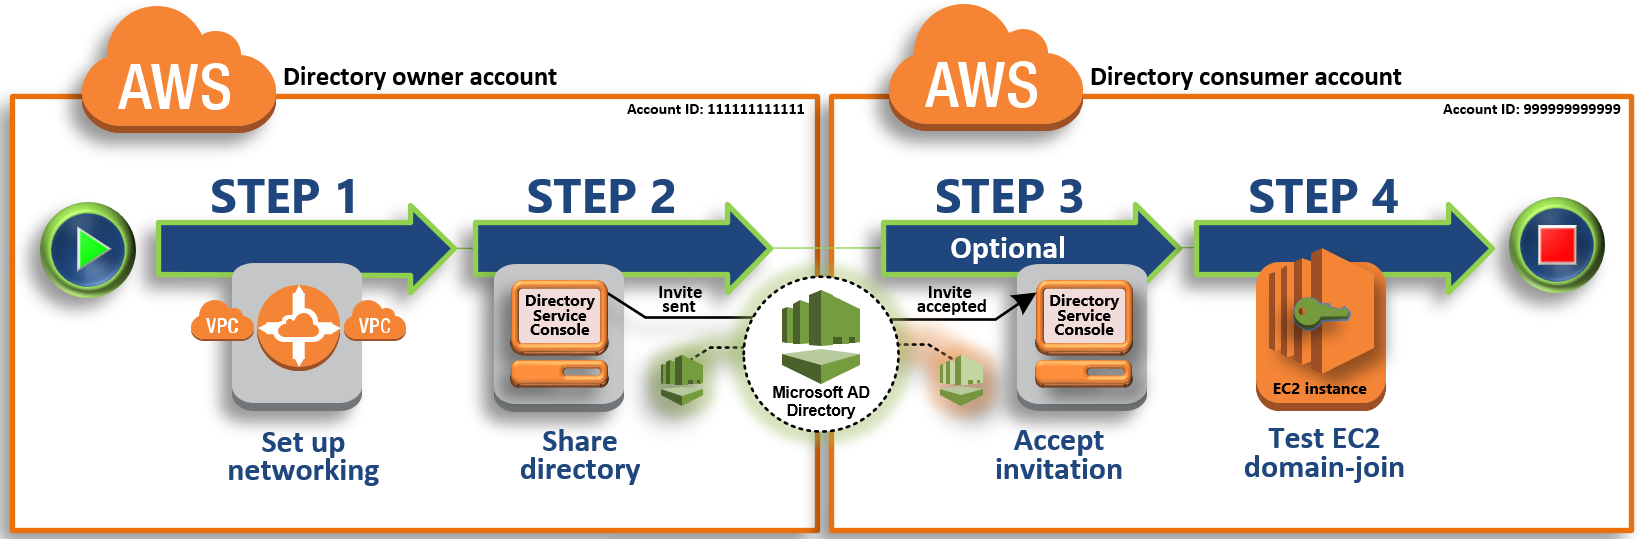 
            Steps to share AWS Managed Microsoft AD: Set up your networking environment, share your directory, accept shared directory invite, and test seamlessly join an Amazon EC2
            instance for Windows Server to a domain.
        